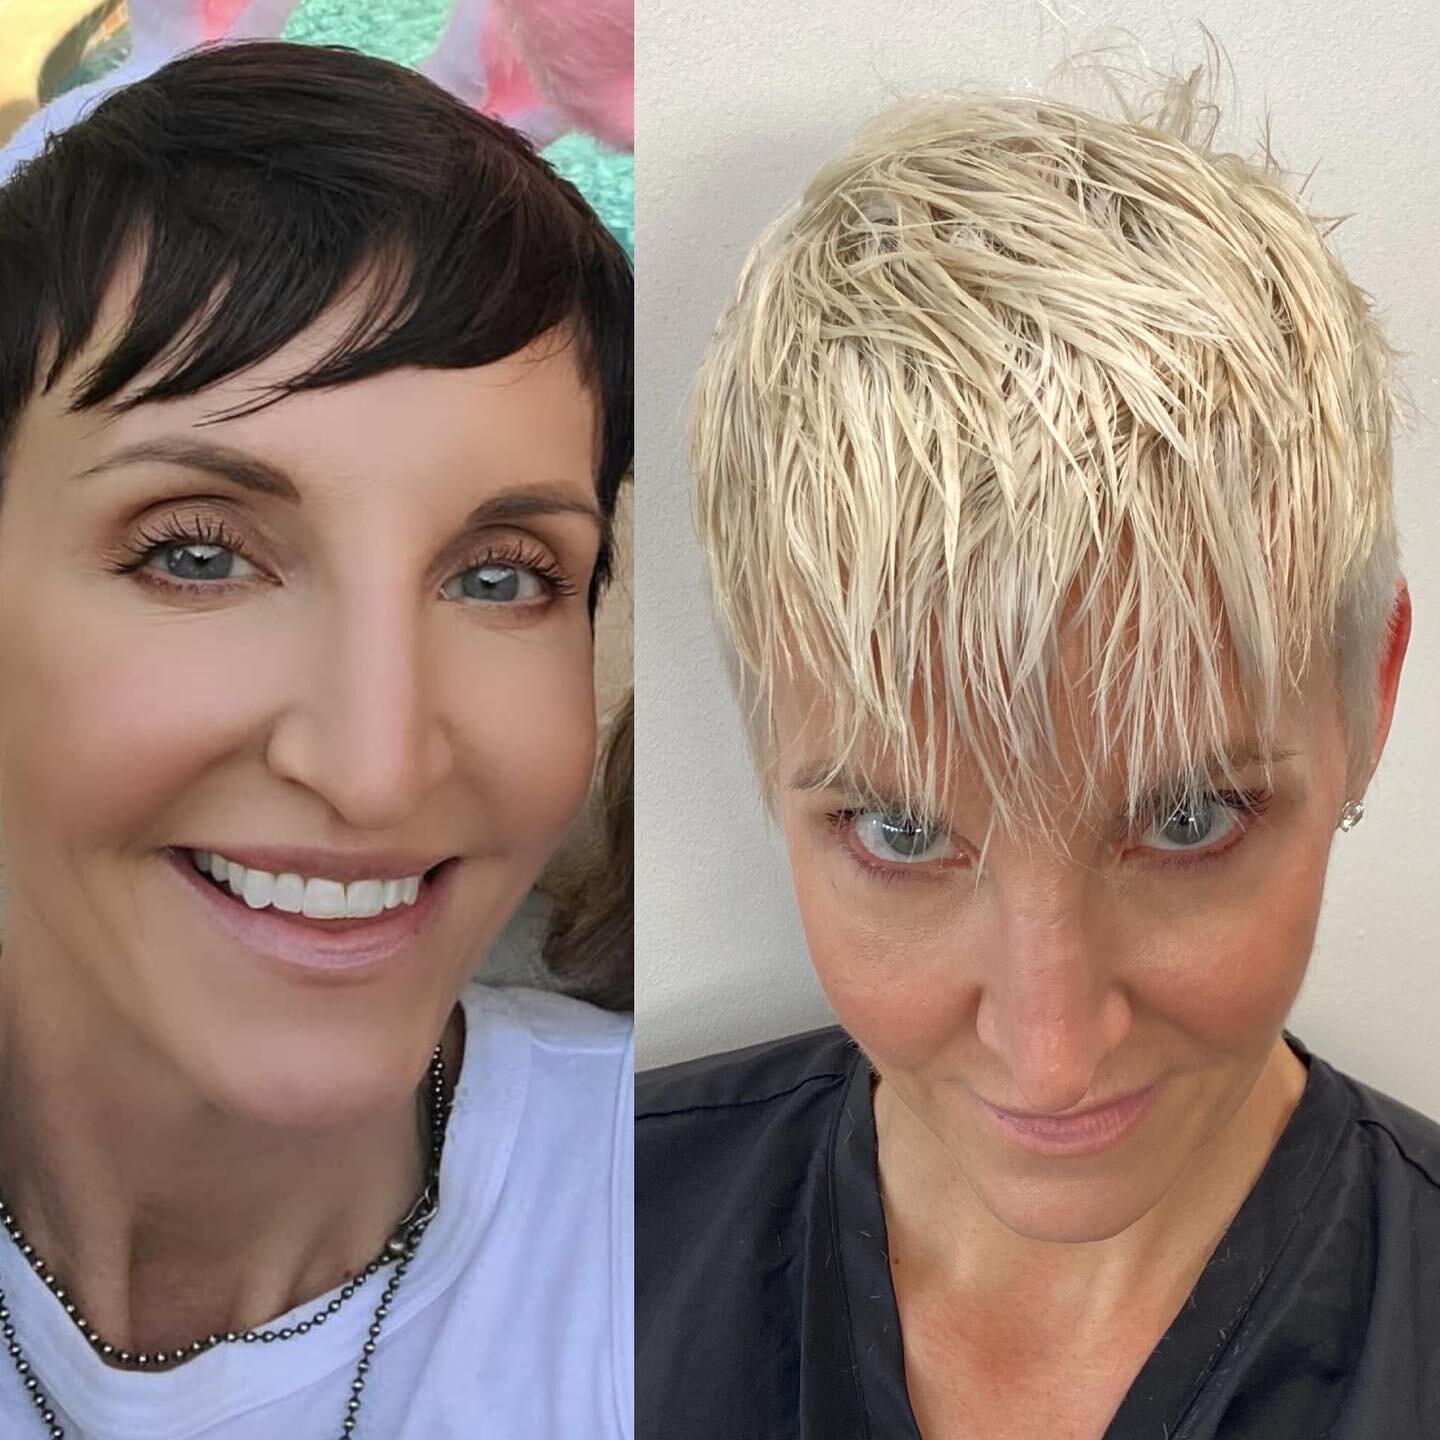 From Chocolate to Vanilla! All in one go! Platinum Card technique (back to backs) using Redken&rsquo;s Flash Lift. Then Olaplaex #2 j@ the bowl. Then blonding shampoo.
Toned with Ilumina 1.9%

She loves change and will change often!
We do change so w